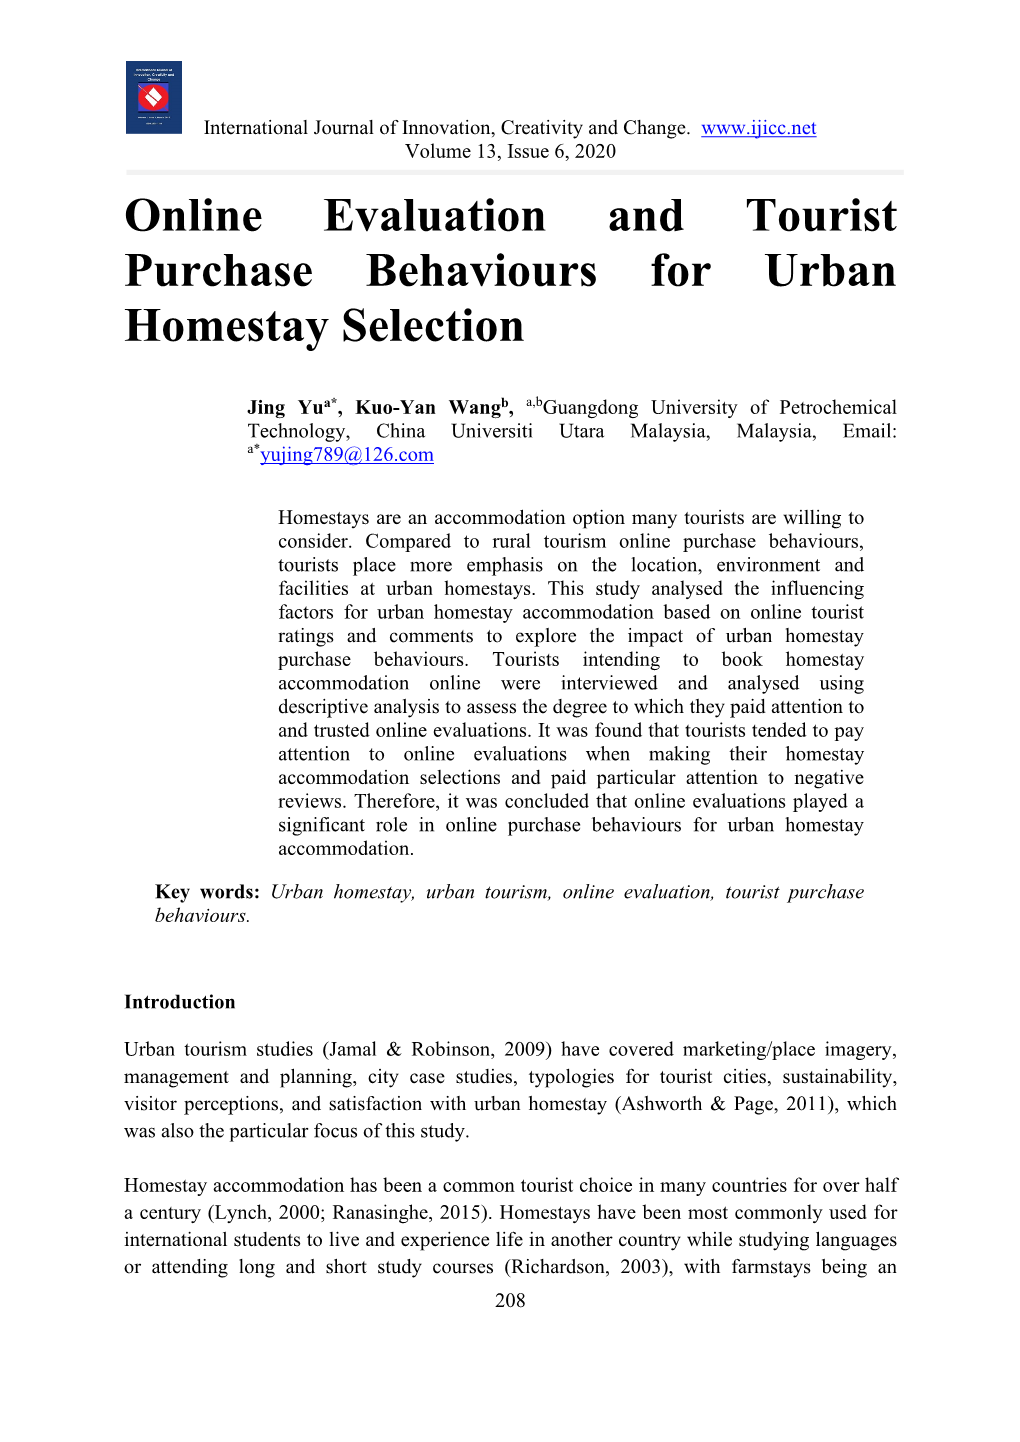 Online Evaluation and Tourist Purchase Behaviours for Urban Homestay Selection